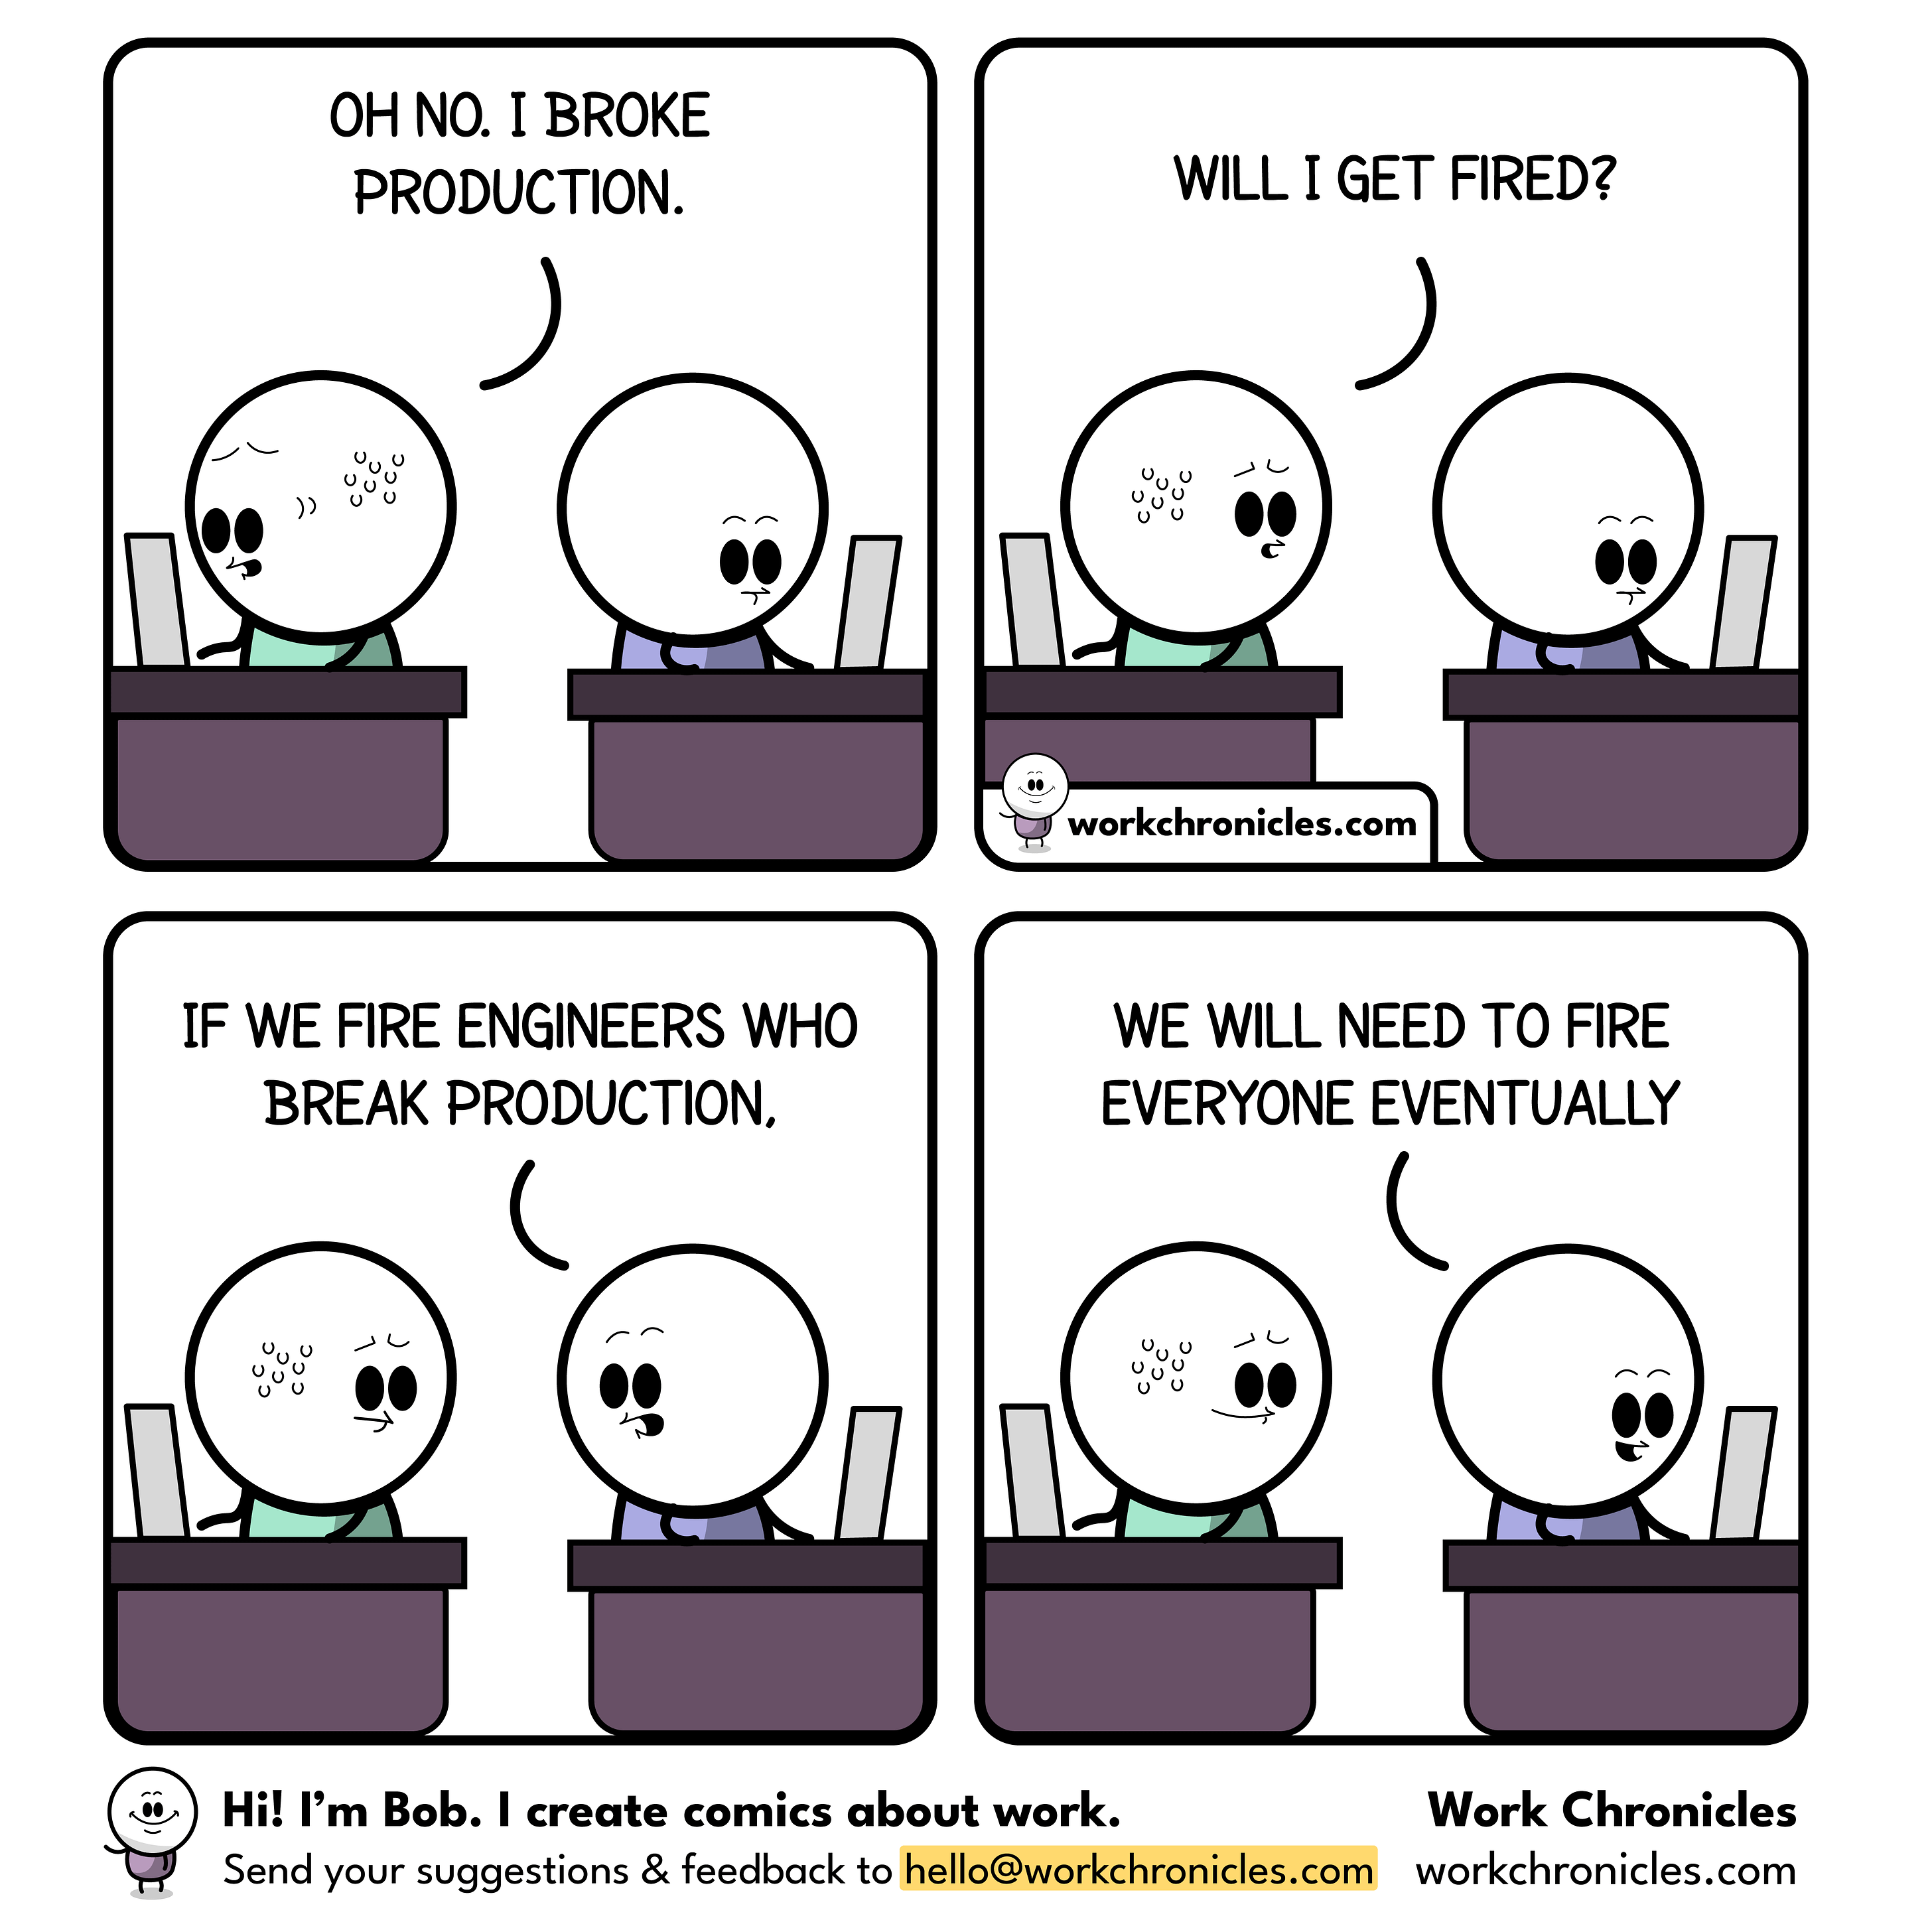 Web comic from workchronicles.com. One developer worrying about being fired for breaking production and another telling him not to worry. If developers were fired for breaking production everyone would be fired.